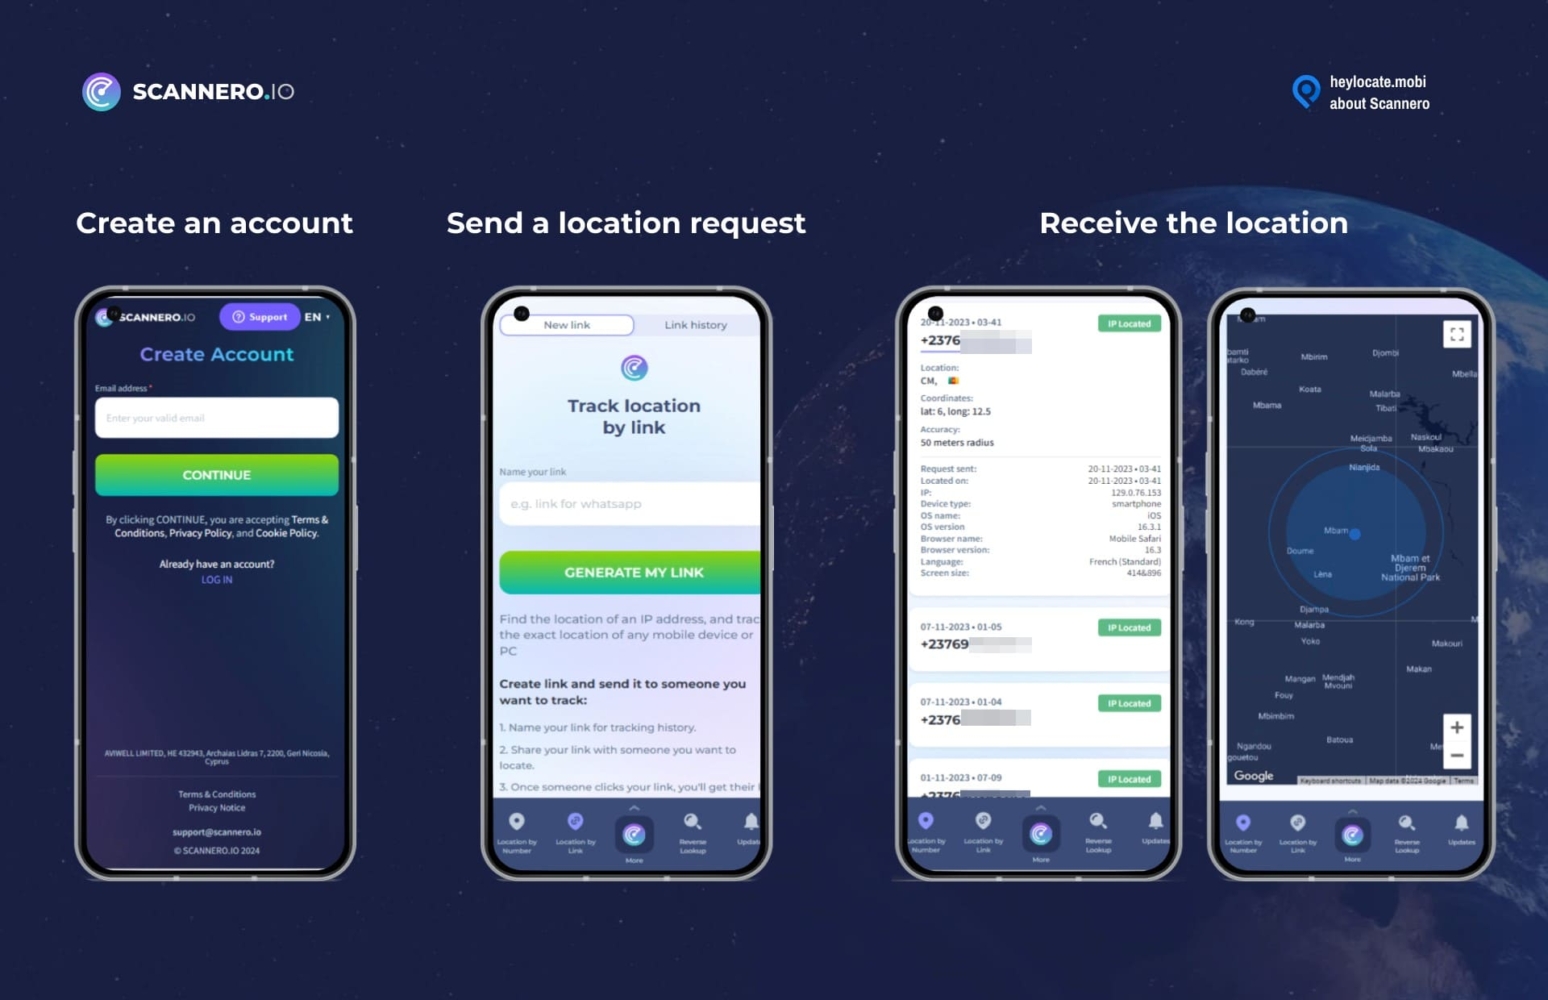 Mobile screens displaying Scannero.io app's location tracking feature, showing steps for account creation, sending a location request, and receiving the tracked location on a map.